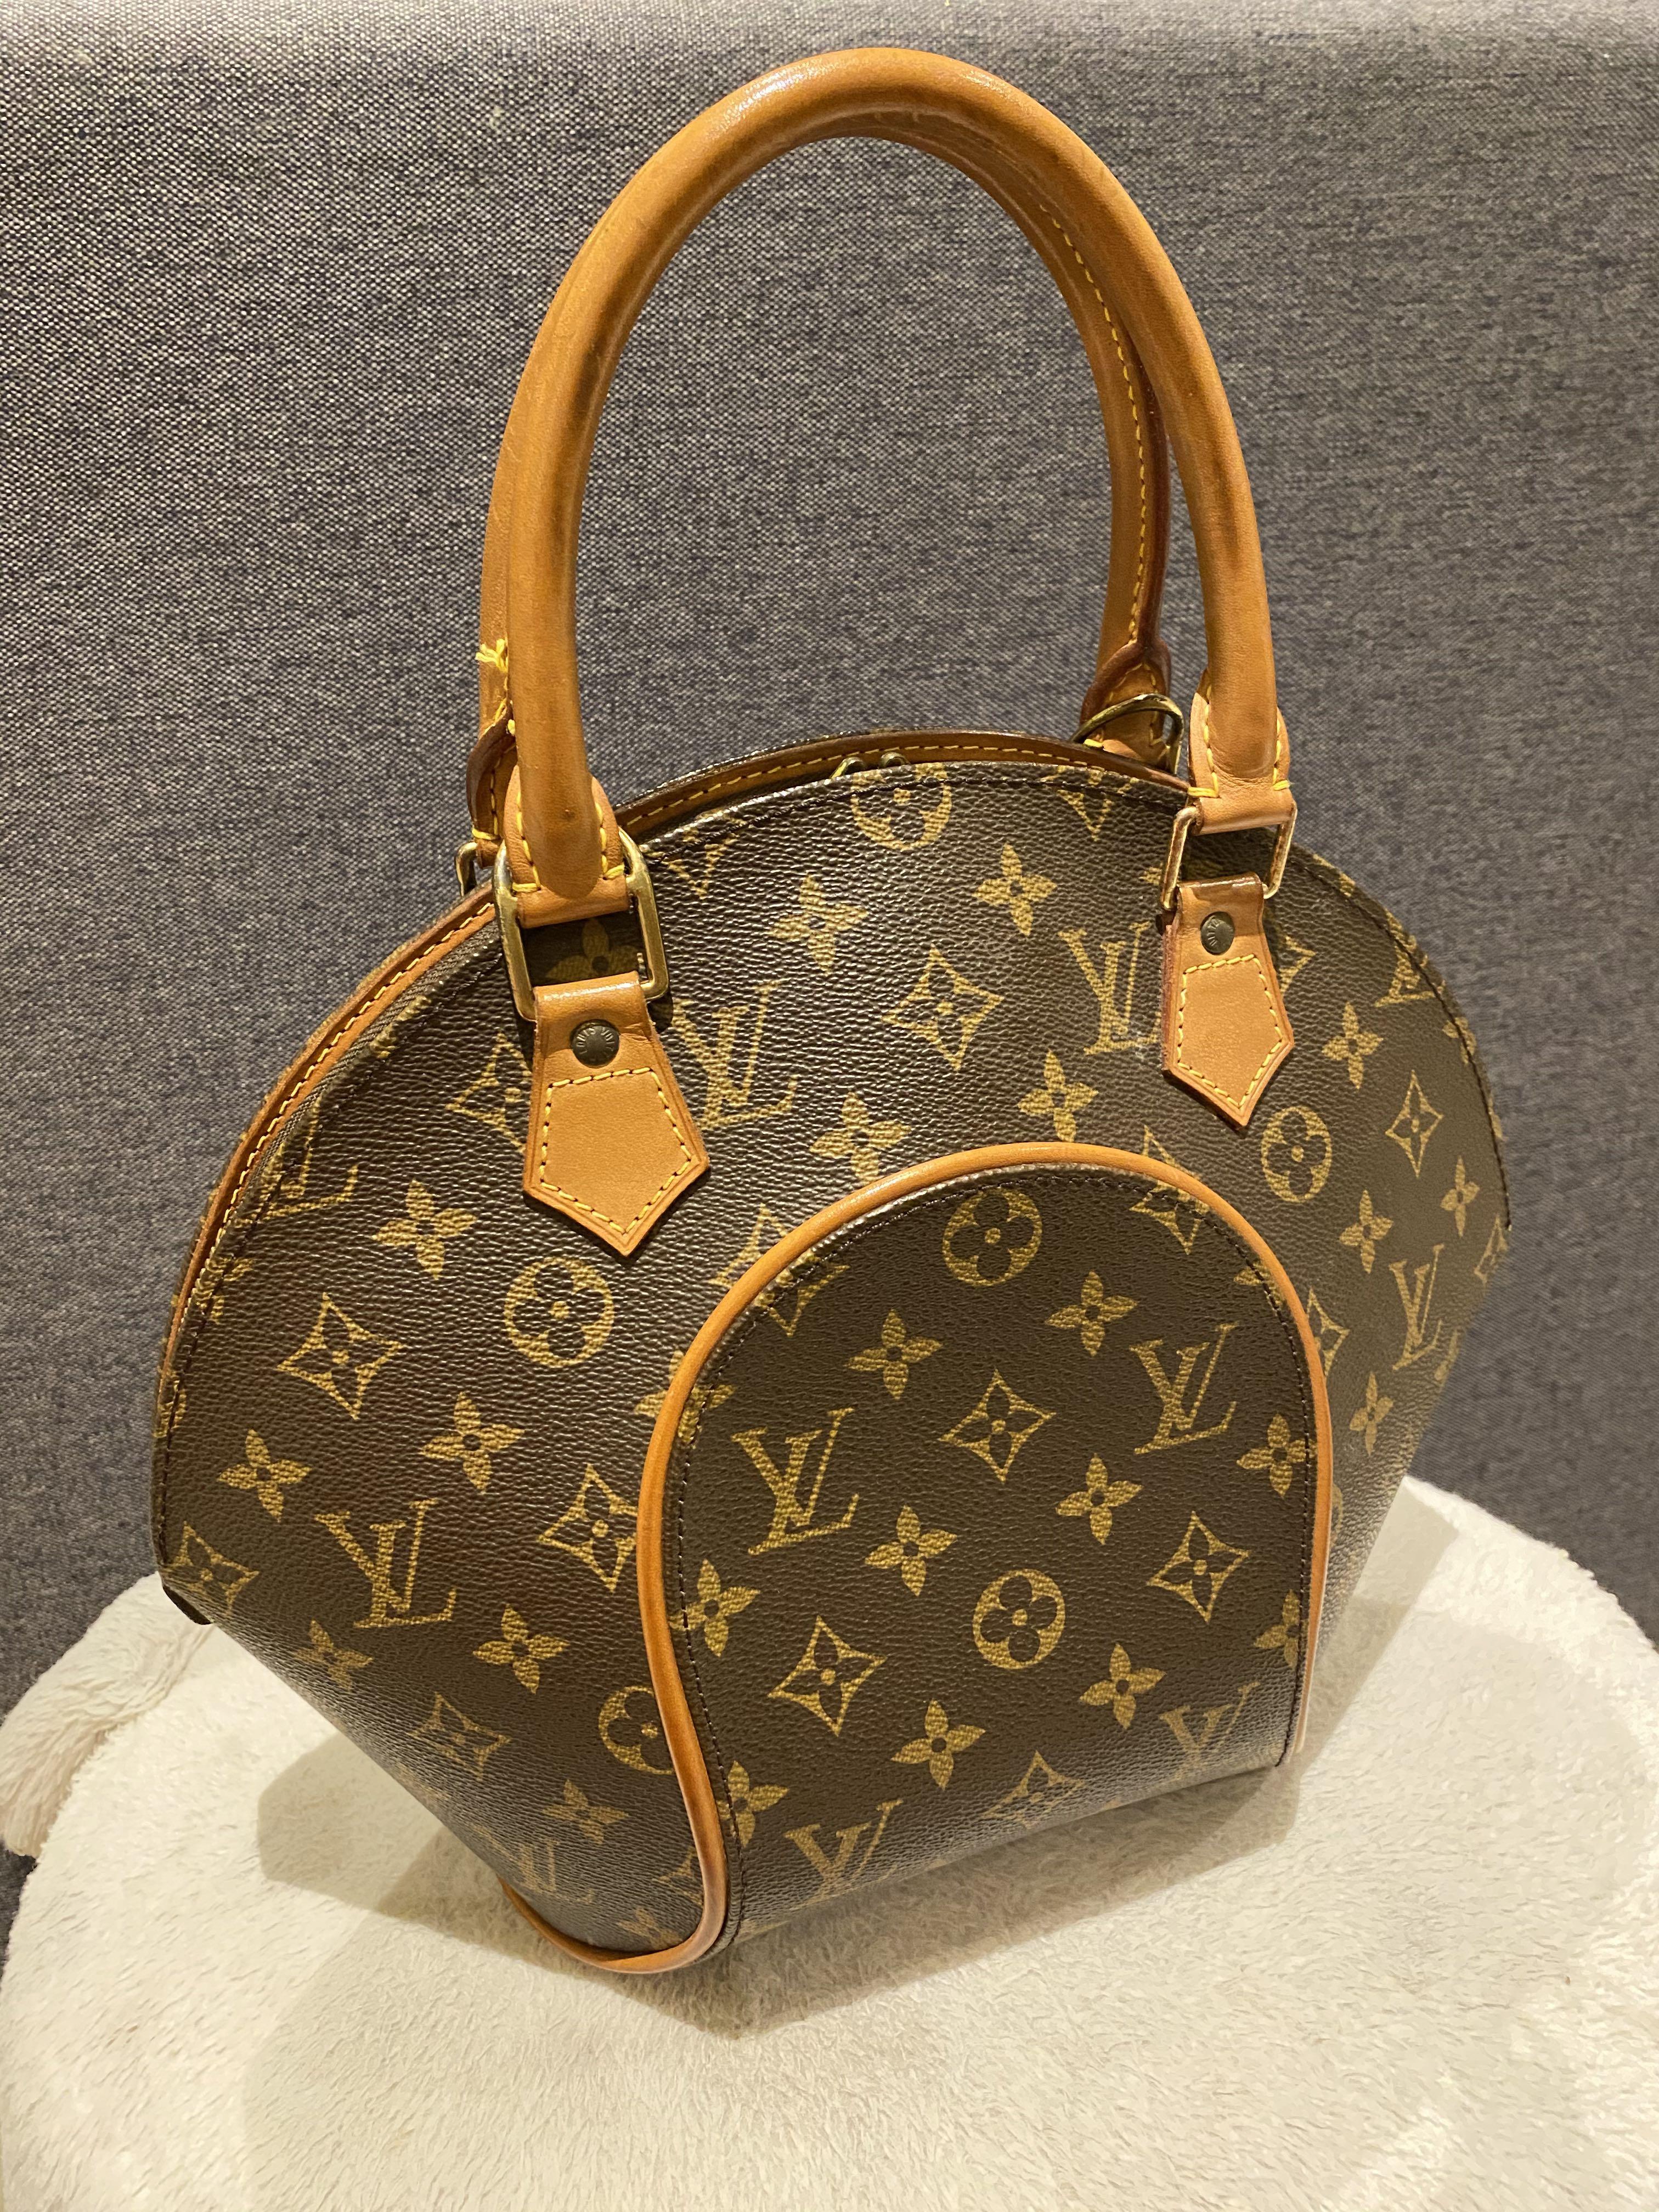 Just received this vintage Ellipse PM & I am in love 😍 Vachetta is  immaculate, hardware is shiny , leather is thick & crisp ! VINTAGE IS  AWESOME 🤎🤎 : r/Louisvuitton